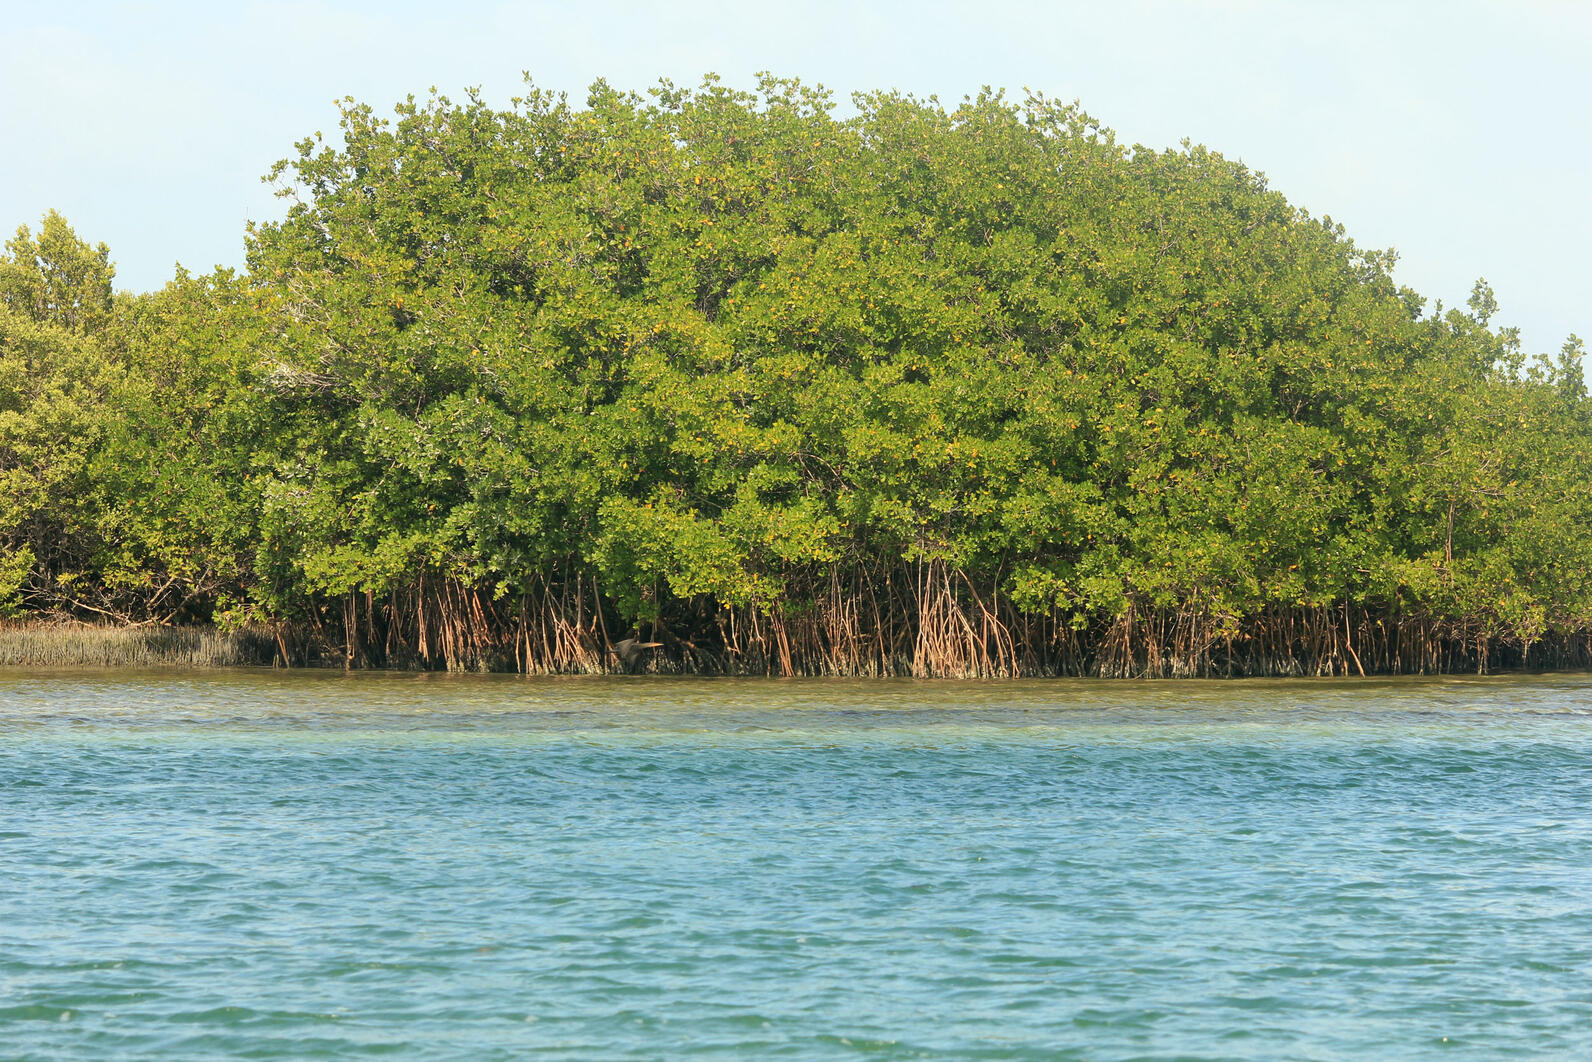 An island of mangroves at Biscayne National Park.